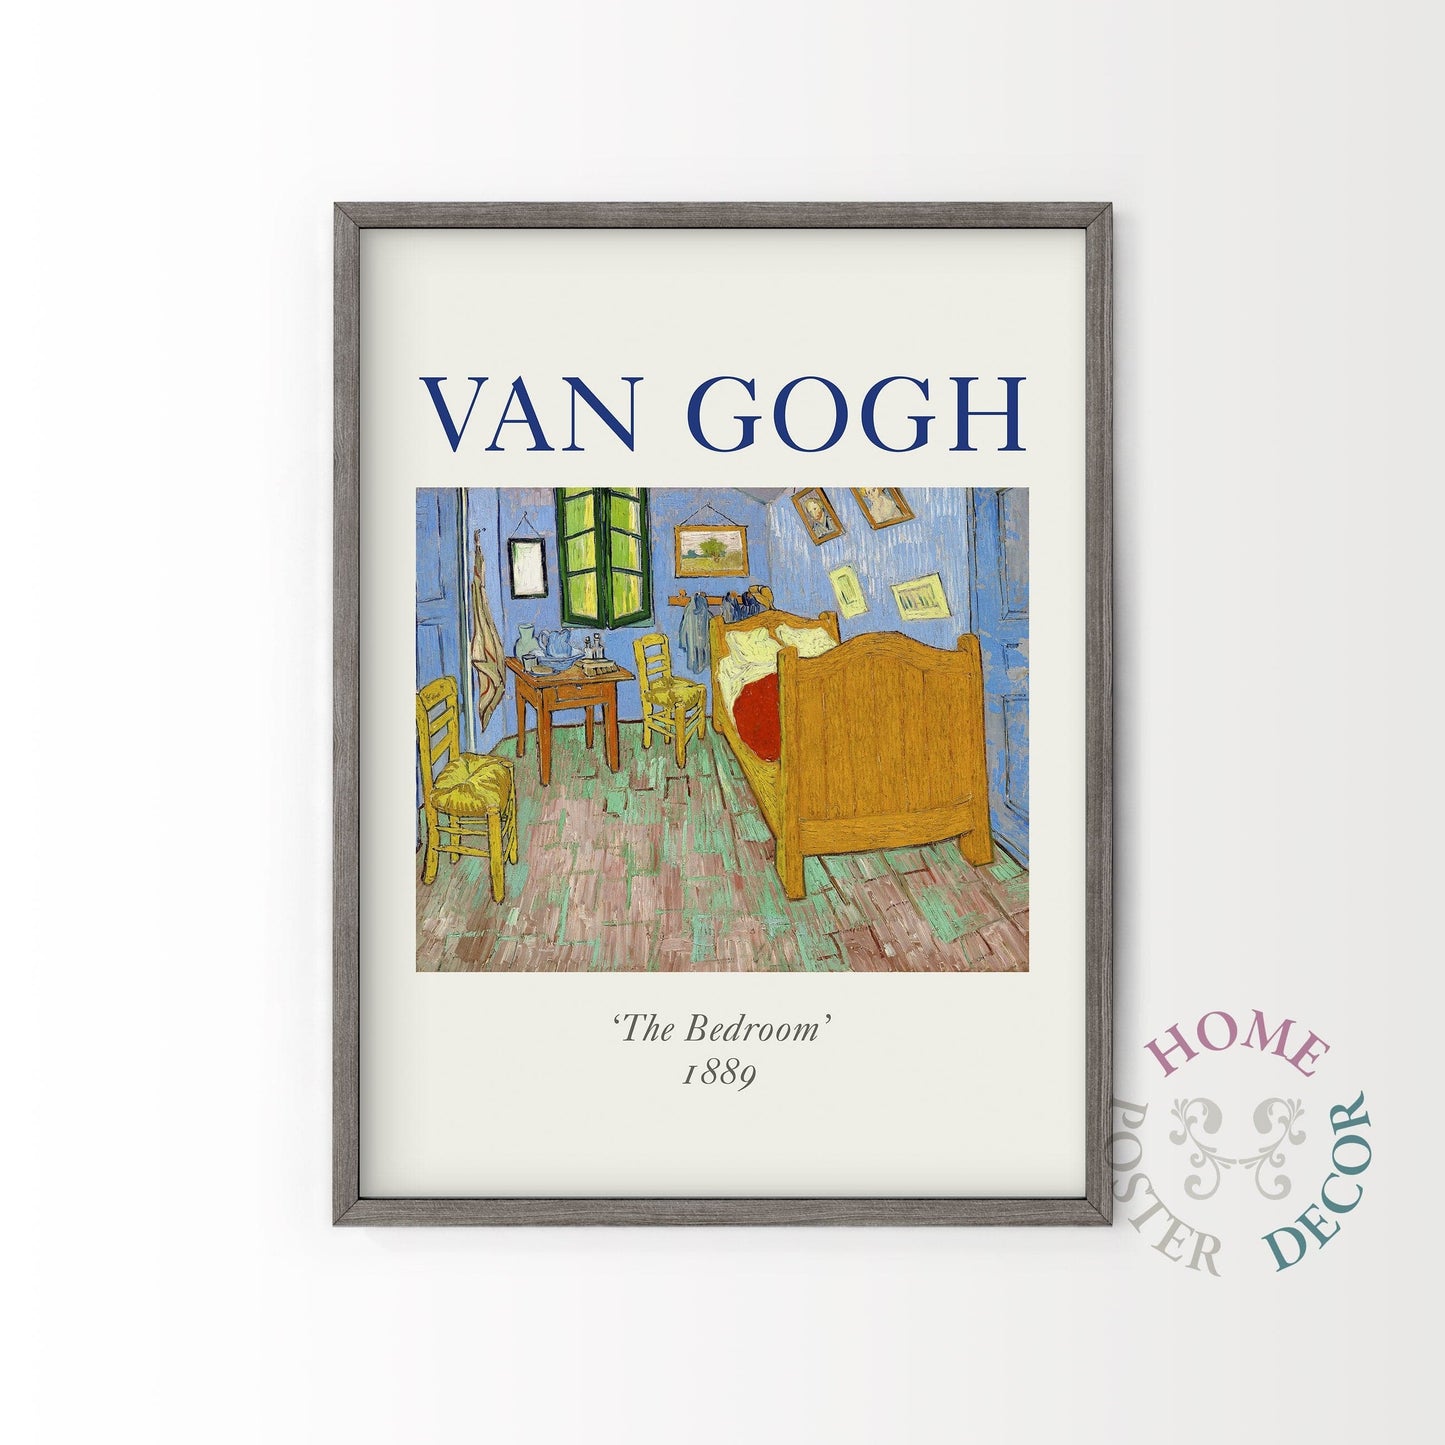 Home Poster Decor The Bedroom, Van Gogh Painting, Van Gogh Print, Famous Painting, Post-impressionist, Christmas Gift, Exhibition Poster, Museum Quality Print